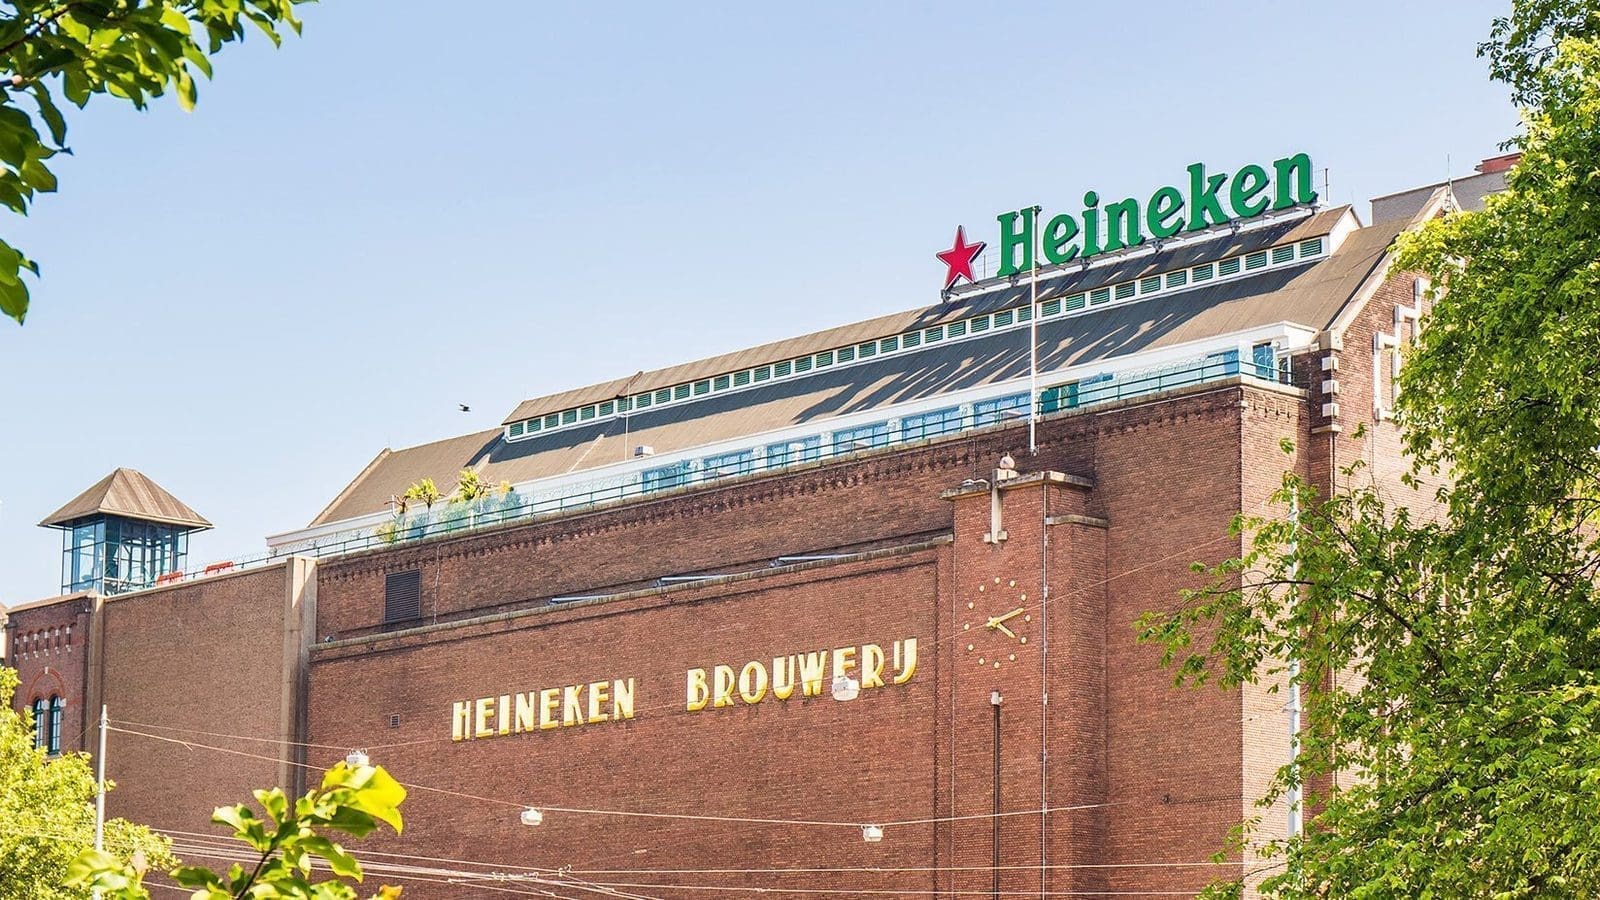 Heineken posts strong full year results, casts doubt on 2023 margin goal due to inflation pressures 